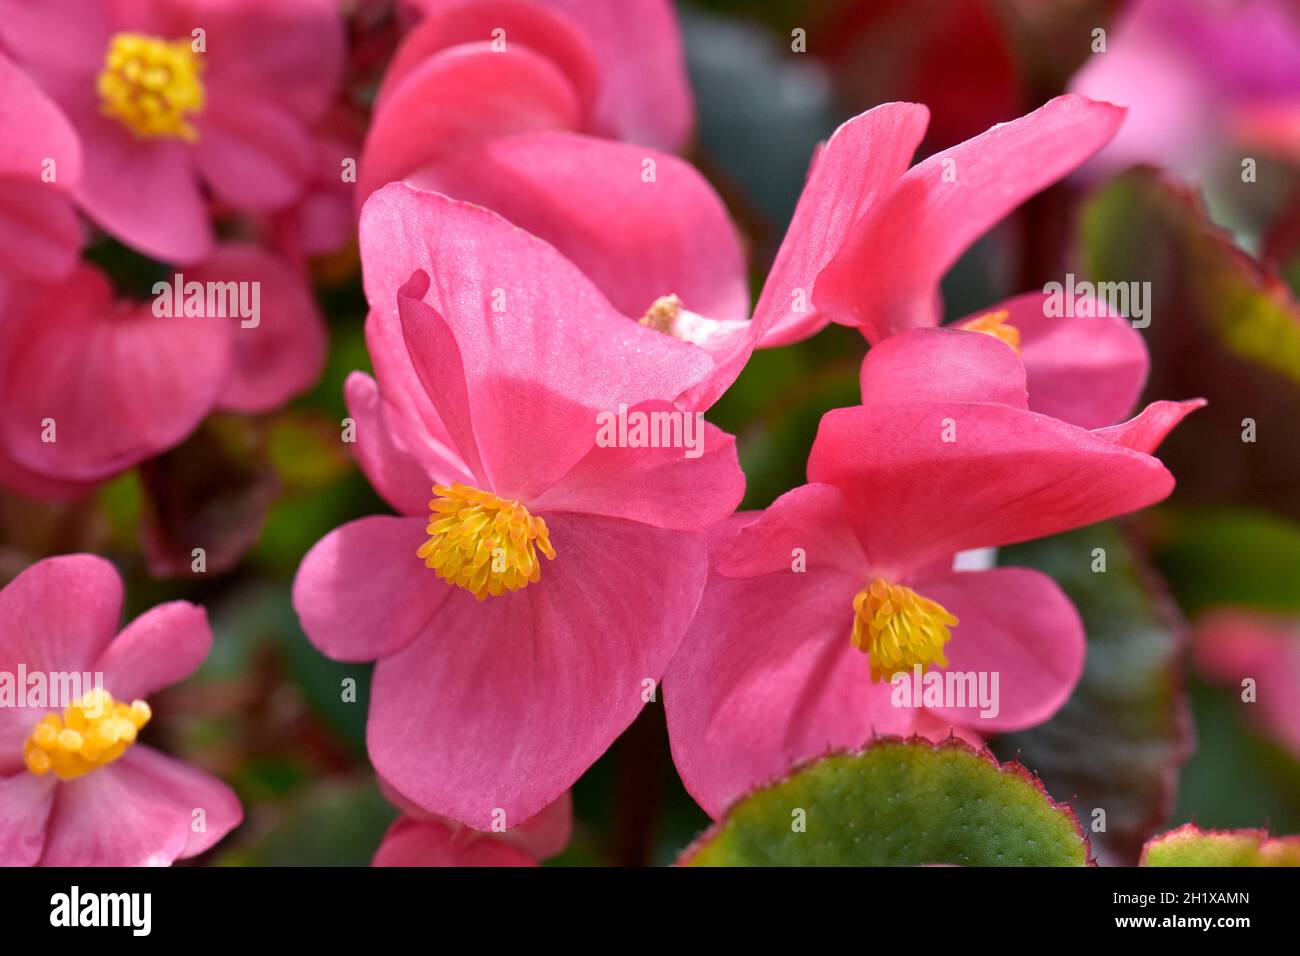 Close up of salmon pink Begonia flowers Stock Photo